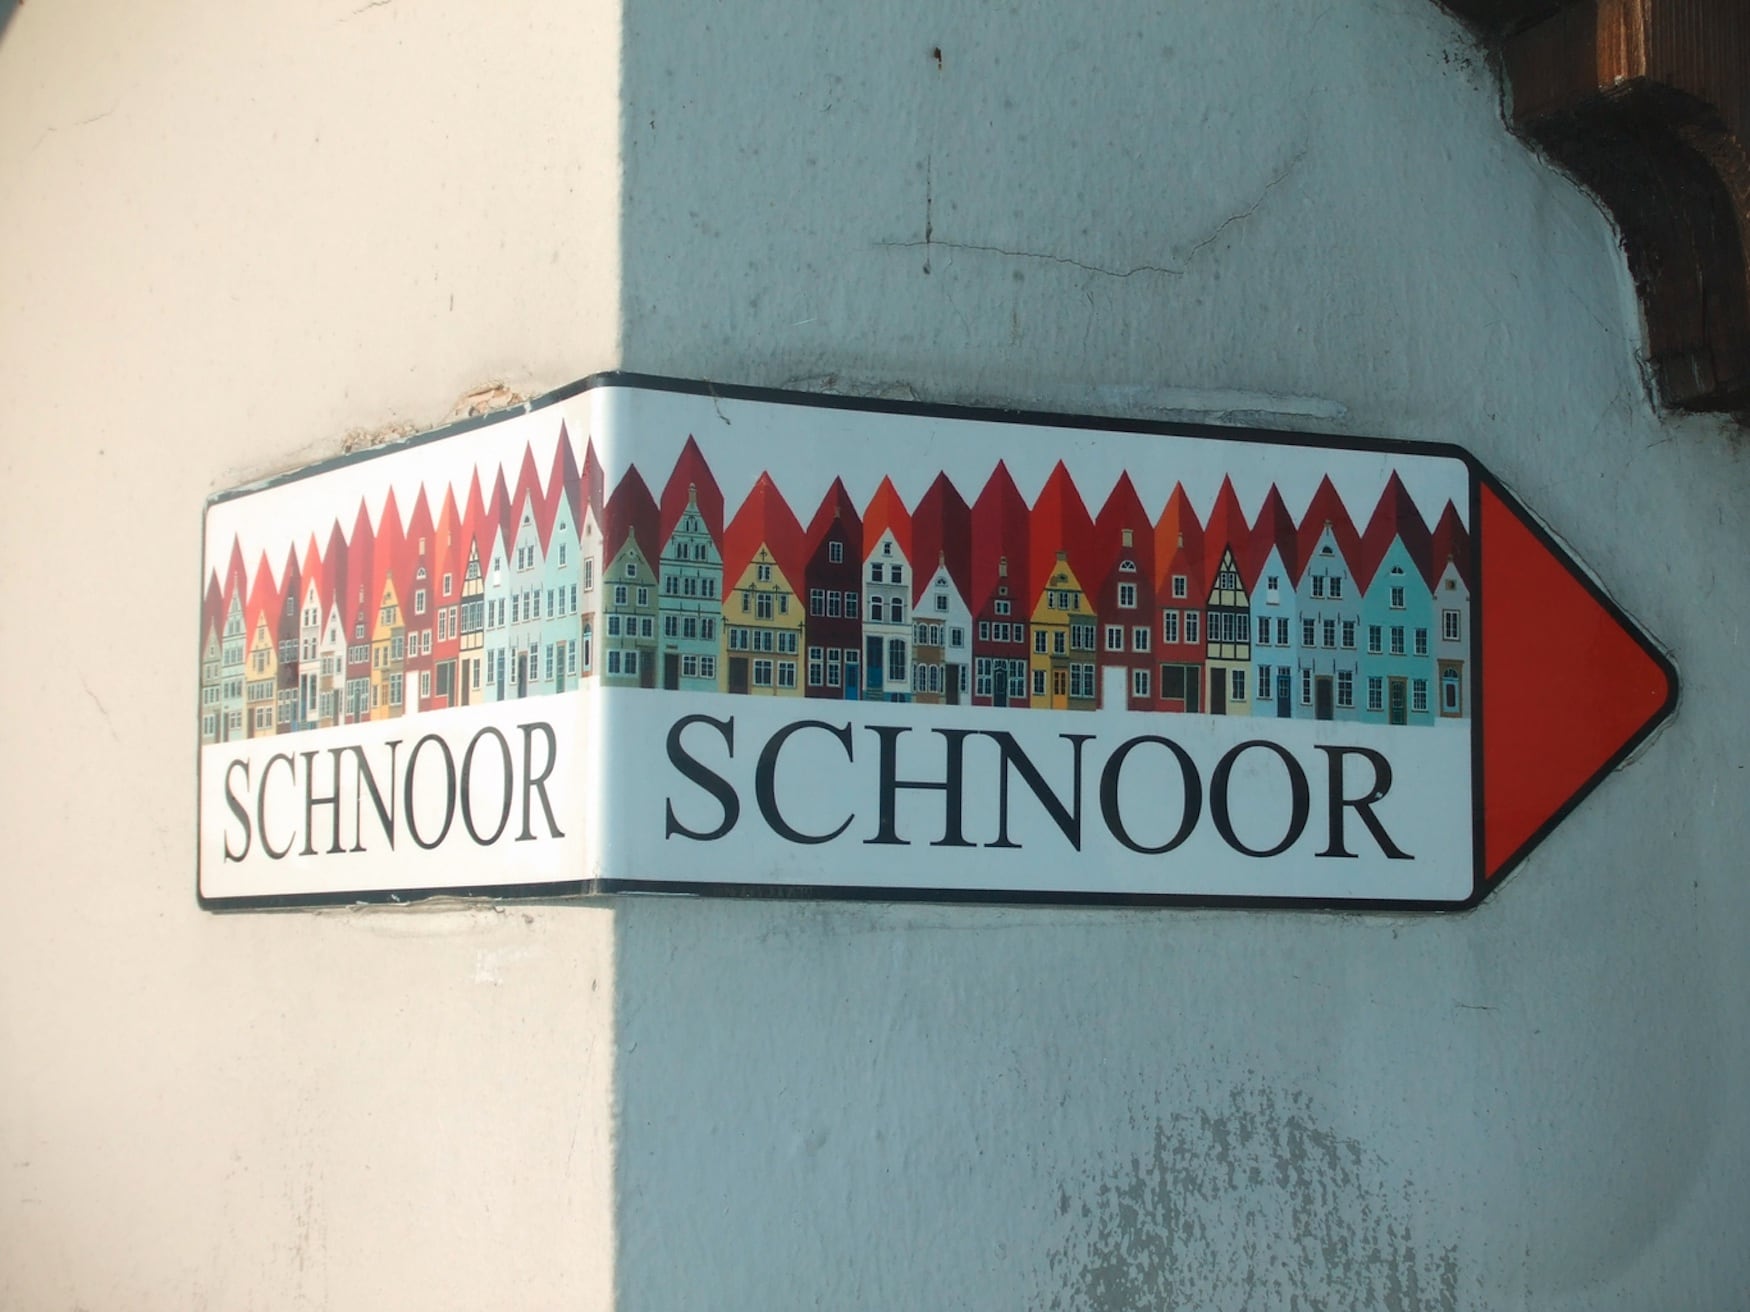 Schnorr signpost in the old town of Bremen